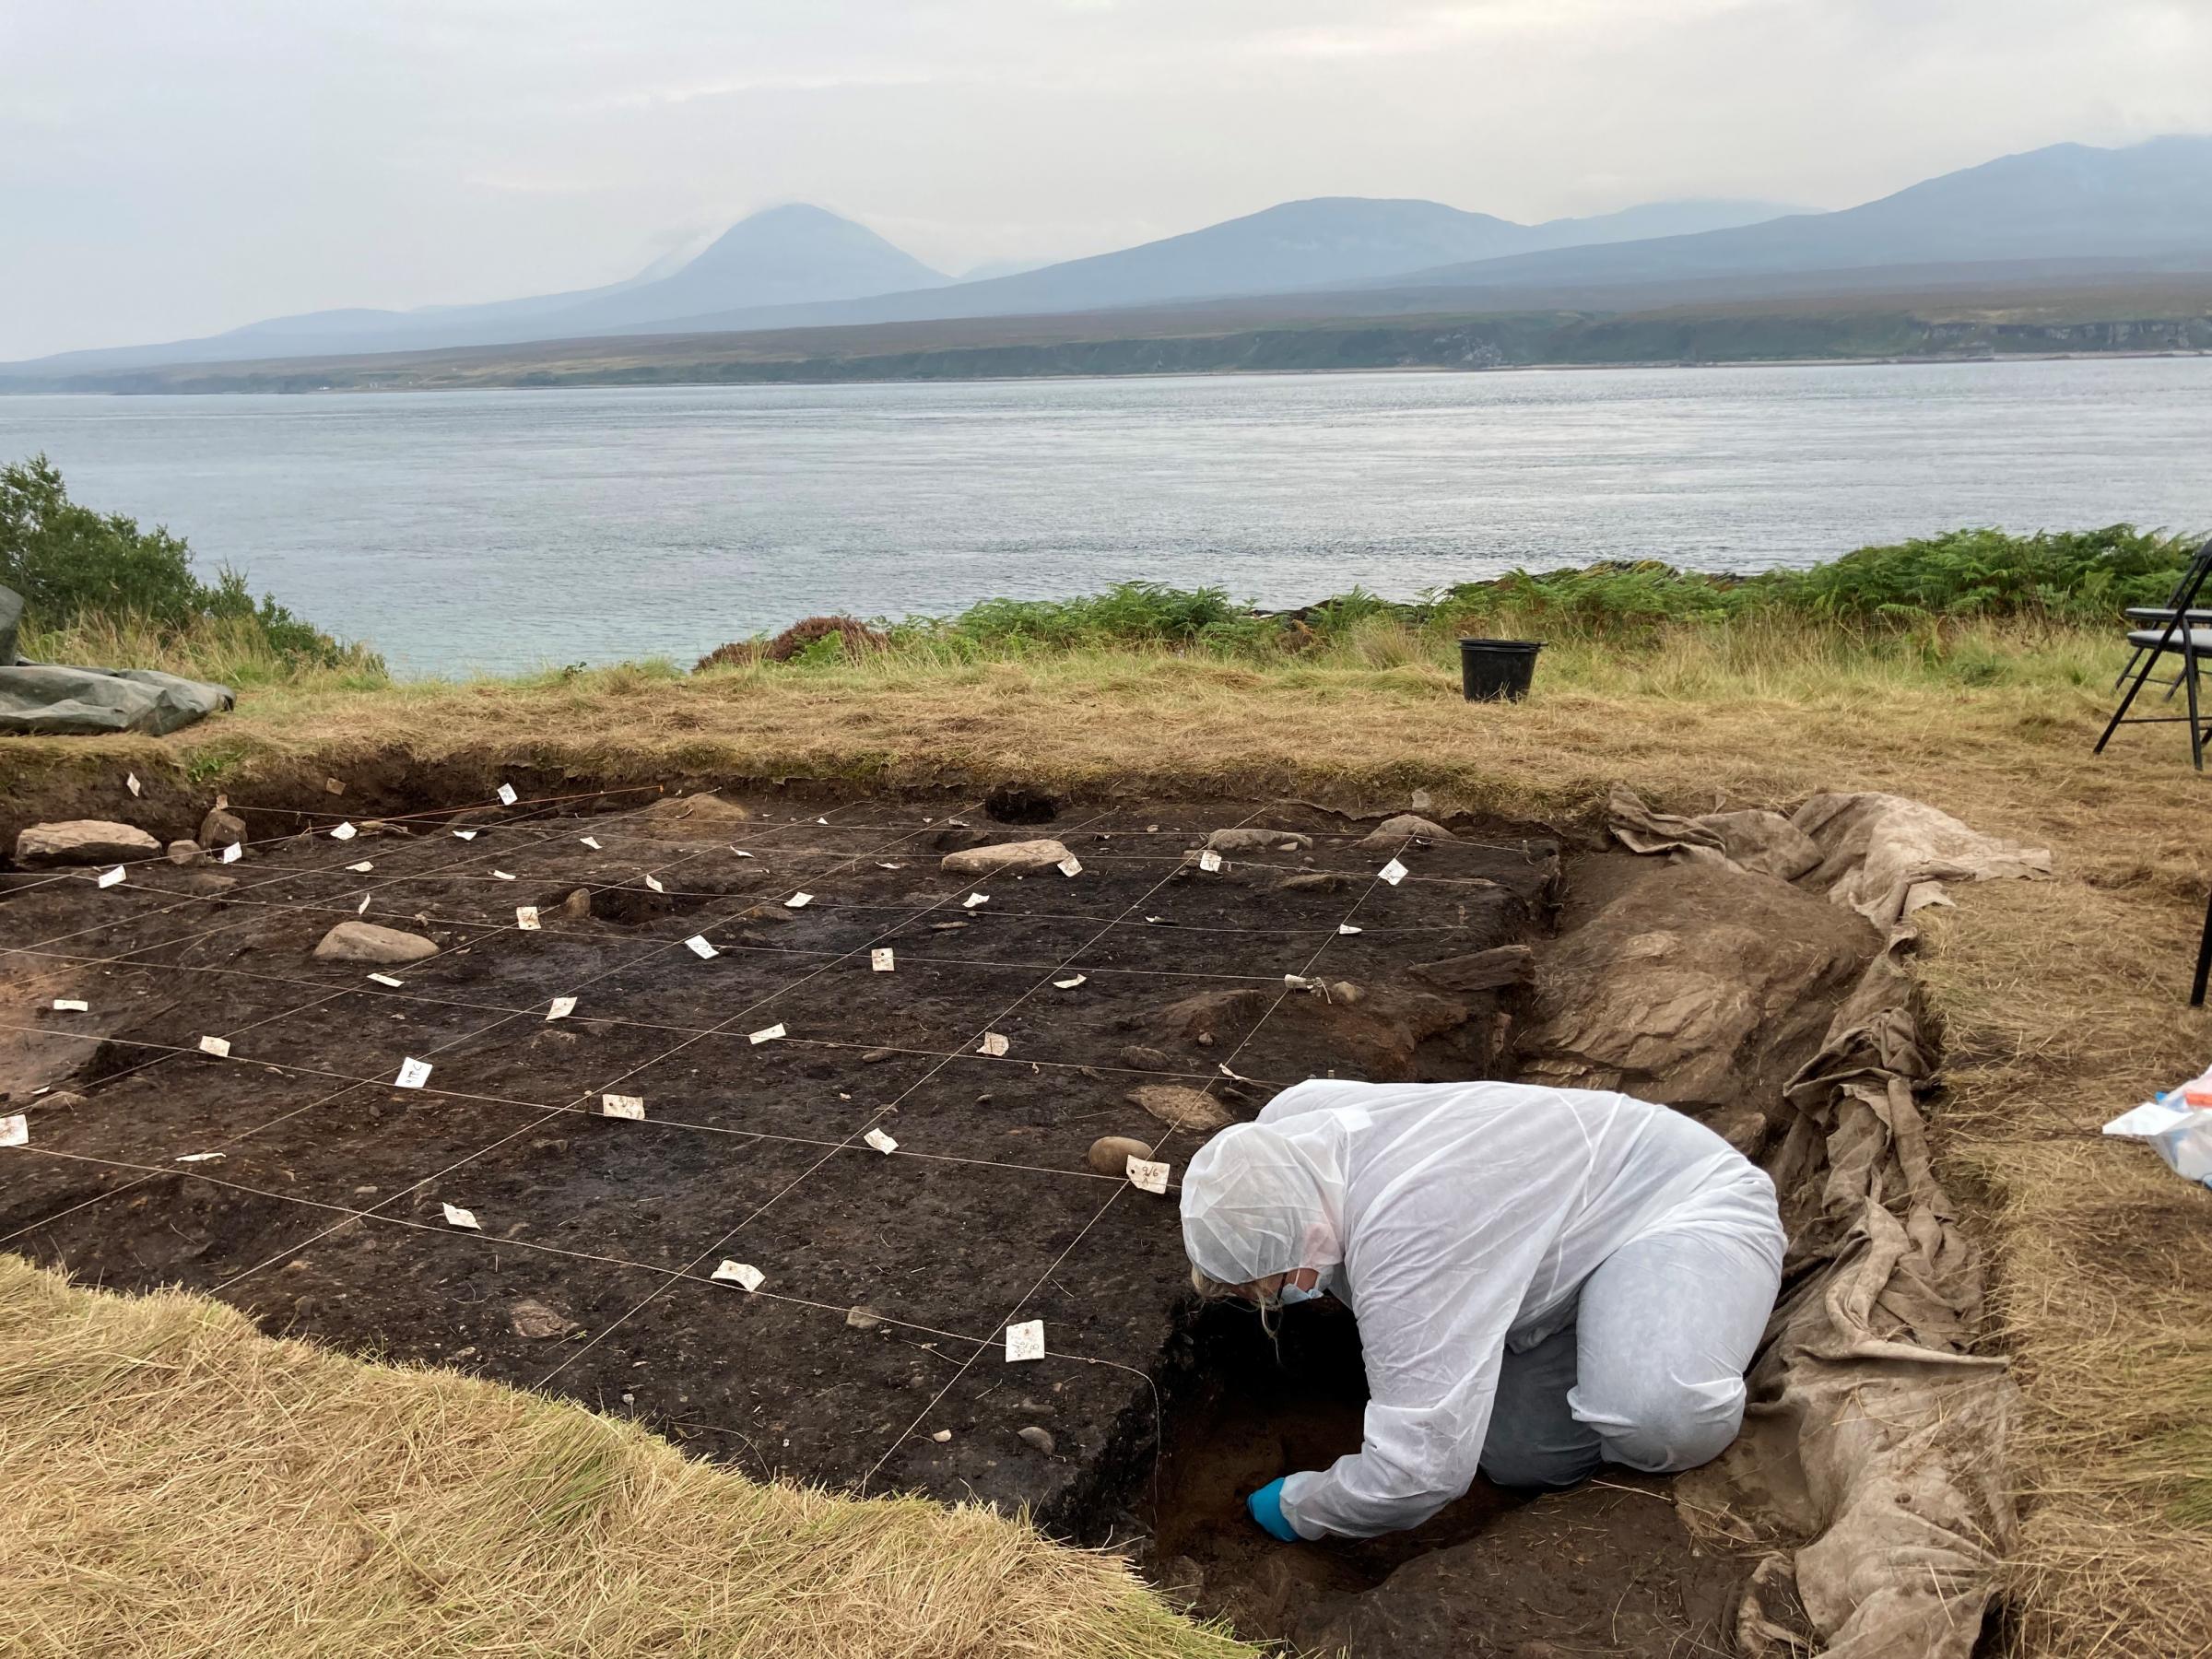 Kate Britton sampling sediments for ancient DNA analysis at archaeological site Rubha Port an t-Seilich, Islay, during an excavation led by project collaborator Prof. Steve Mithen (University of Reading). The analysis of ancient DNA from archaeological